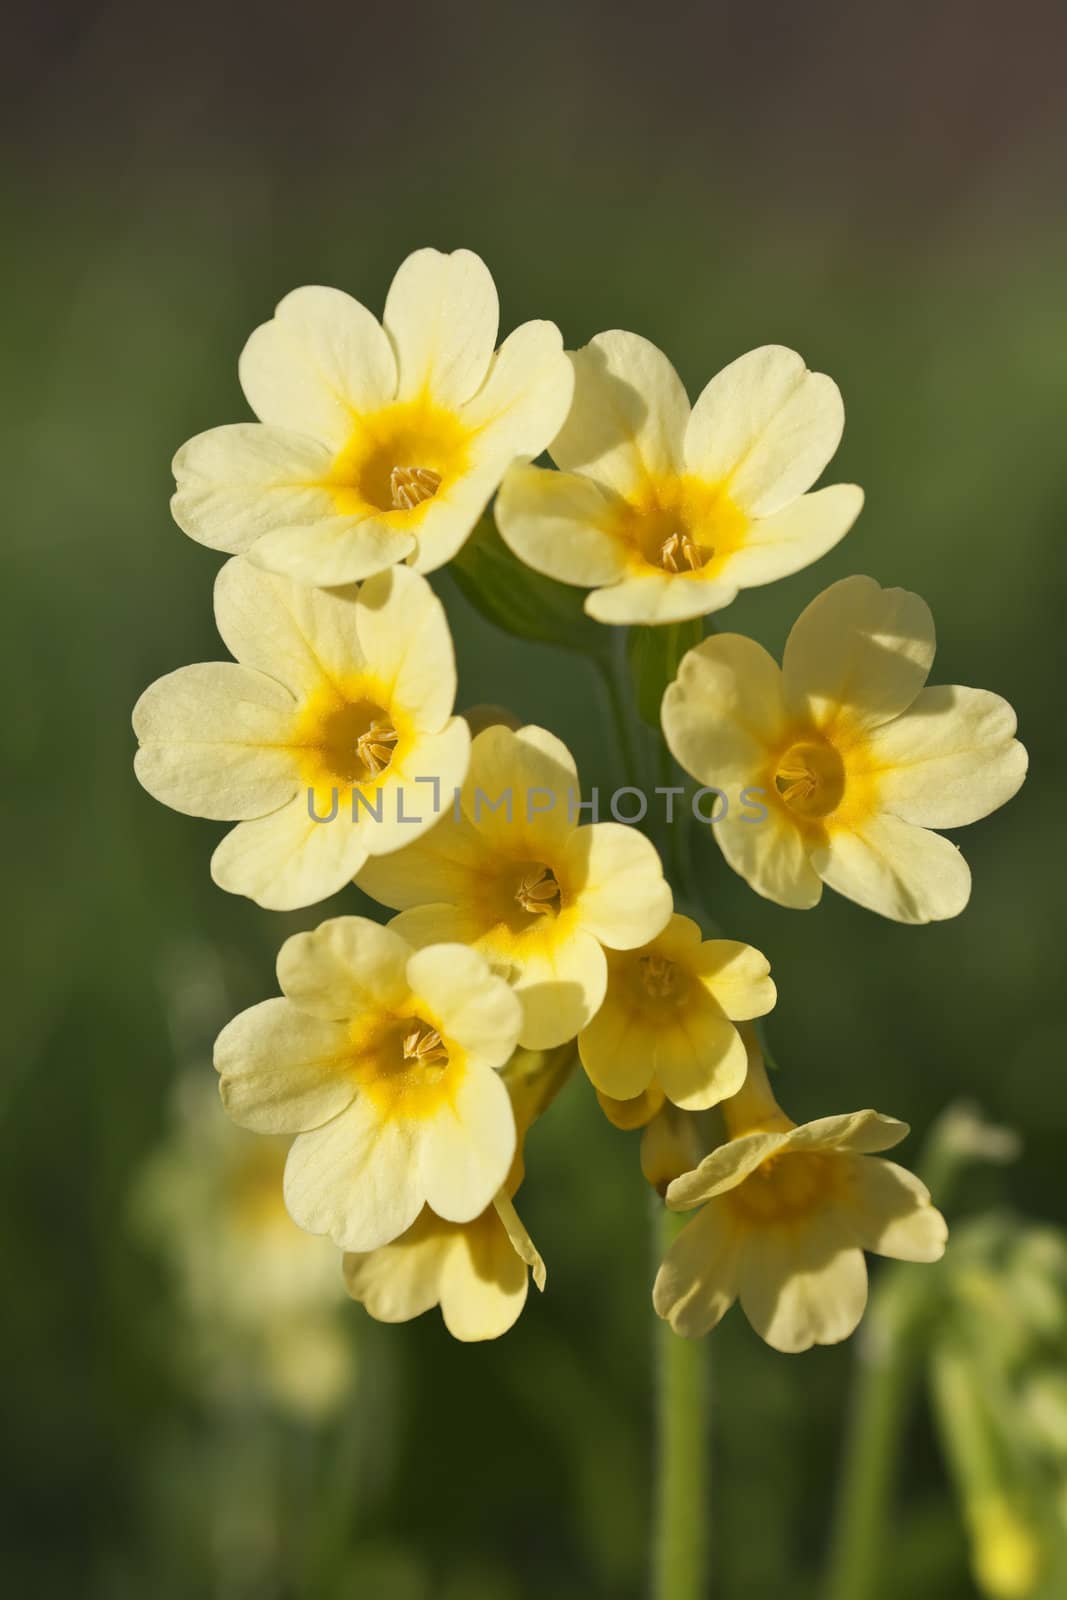 This image shows a macro from a little cowslip bloom